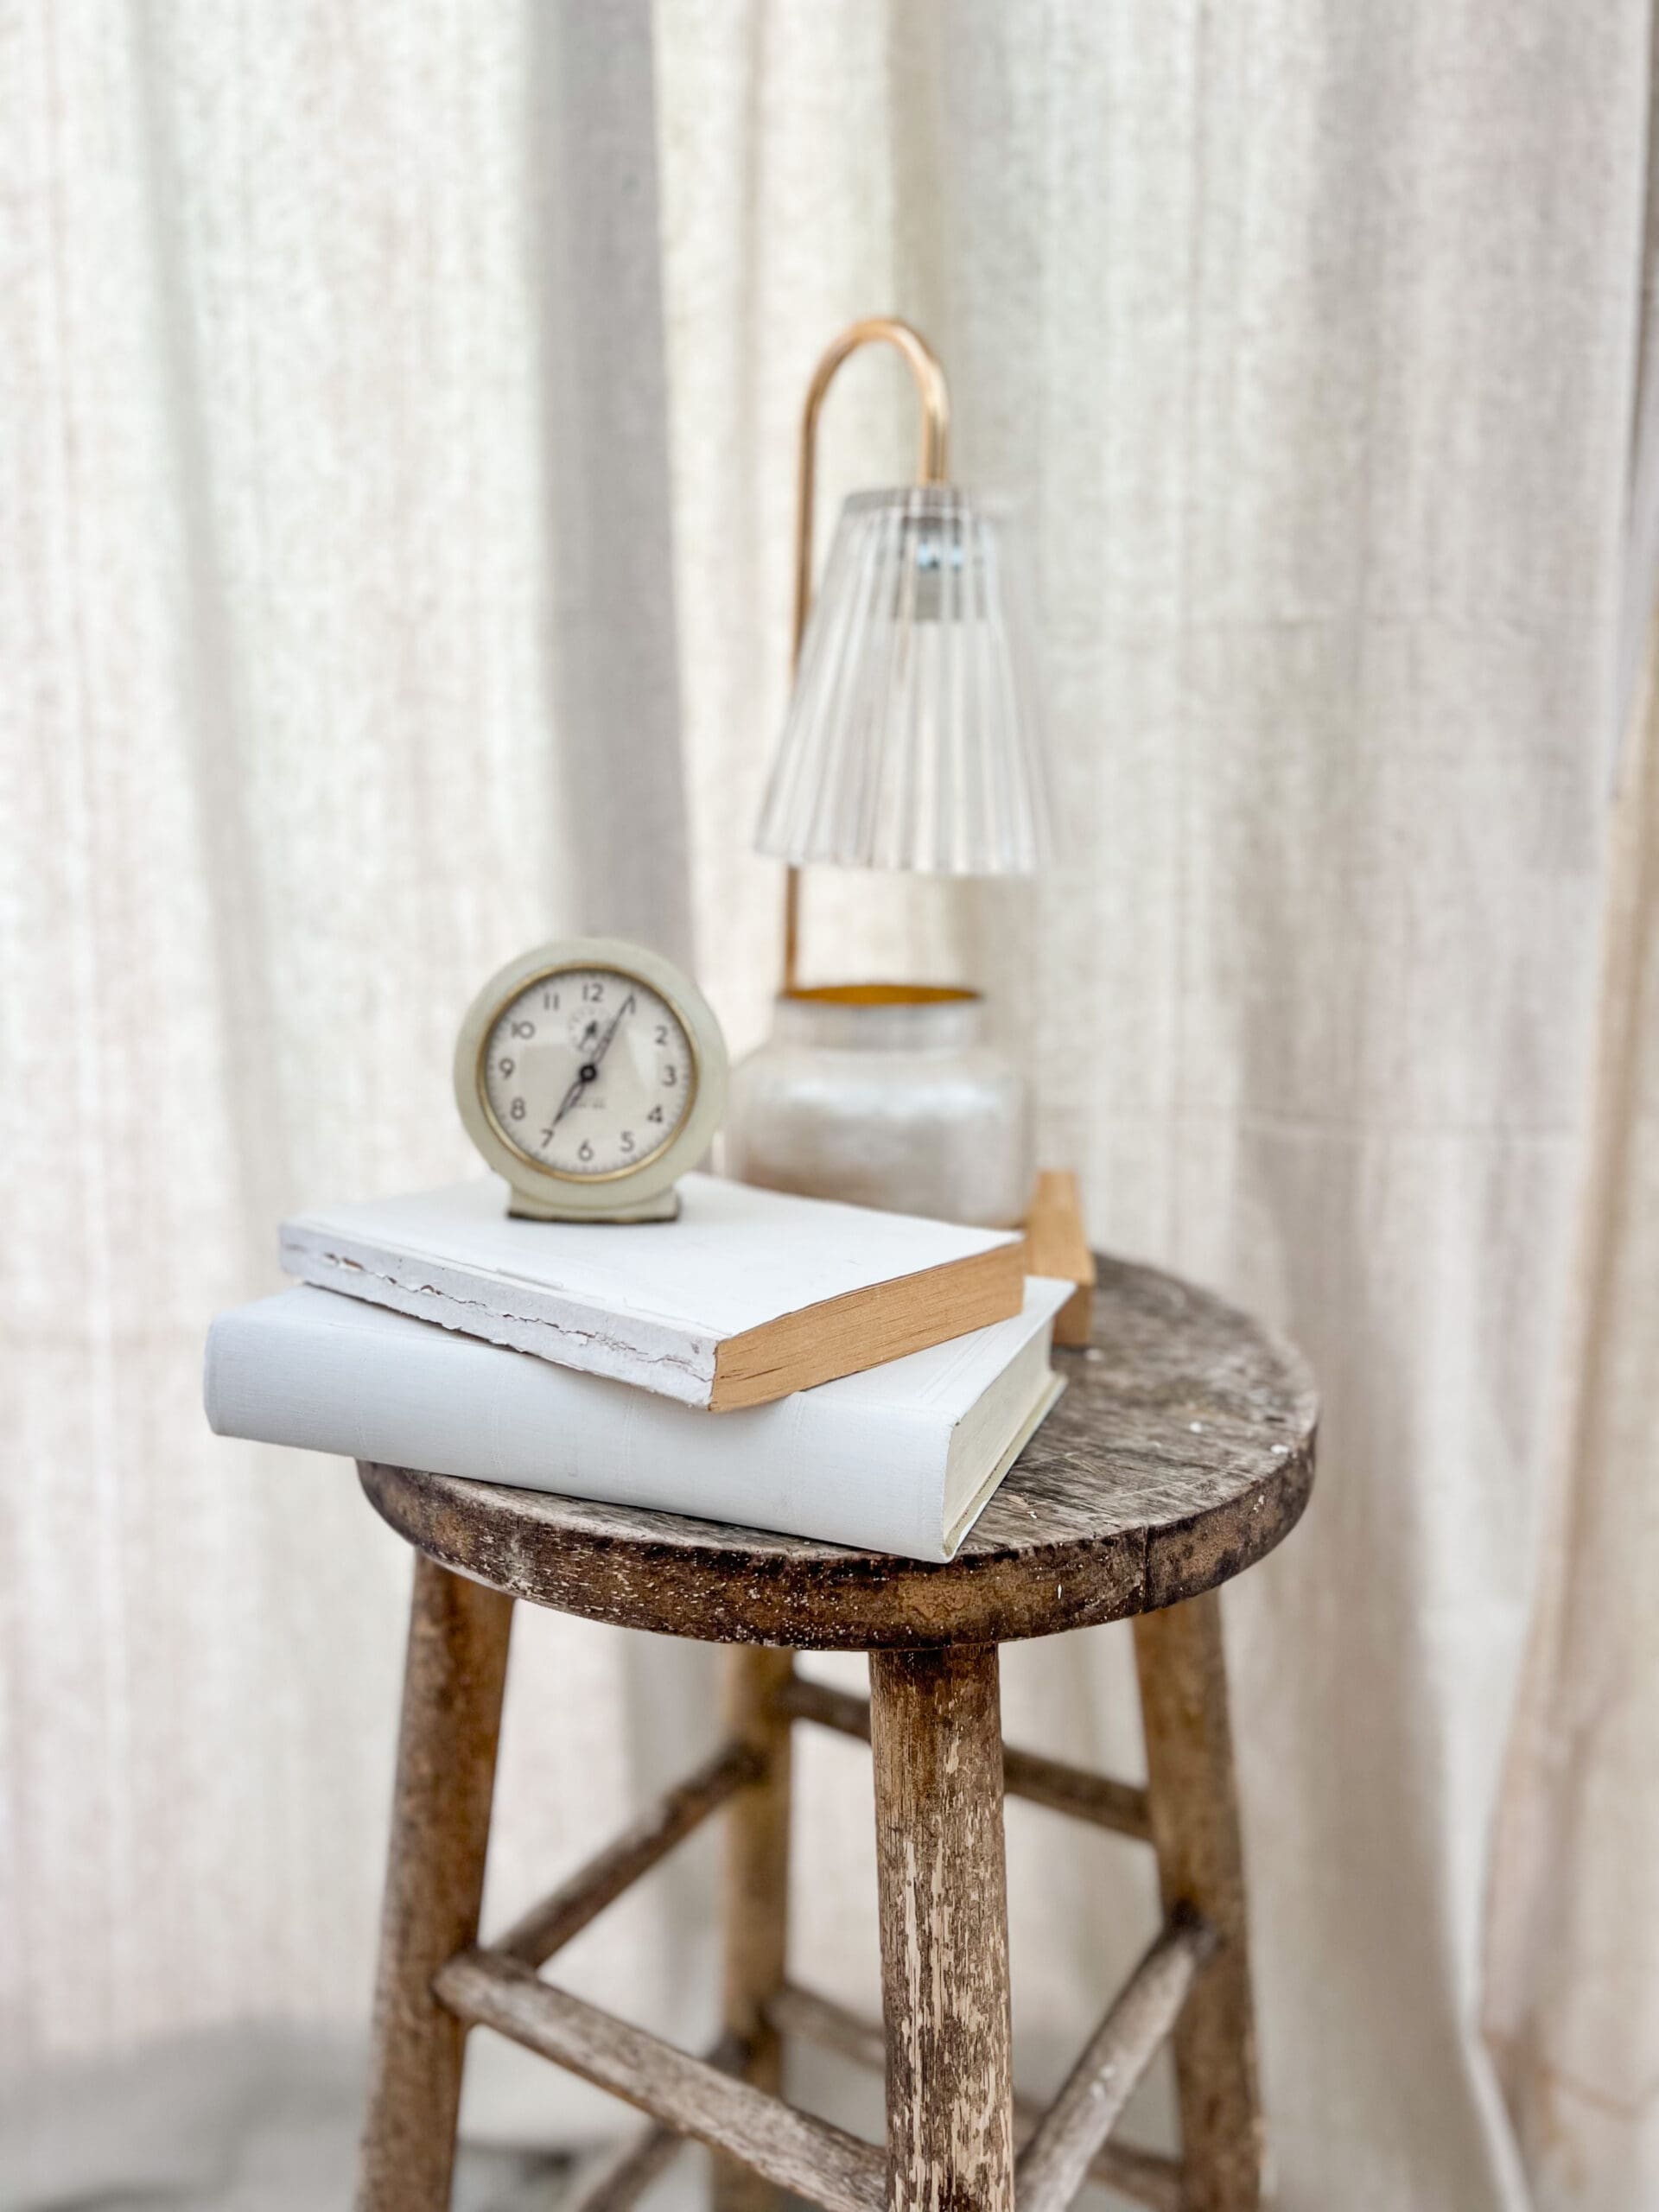 White vintage books, a small white clock, and a candle warmer sitting on a round wooden stool